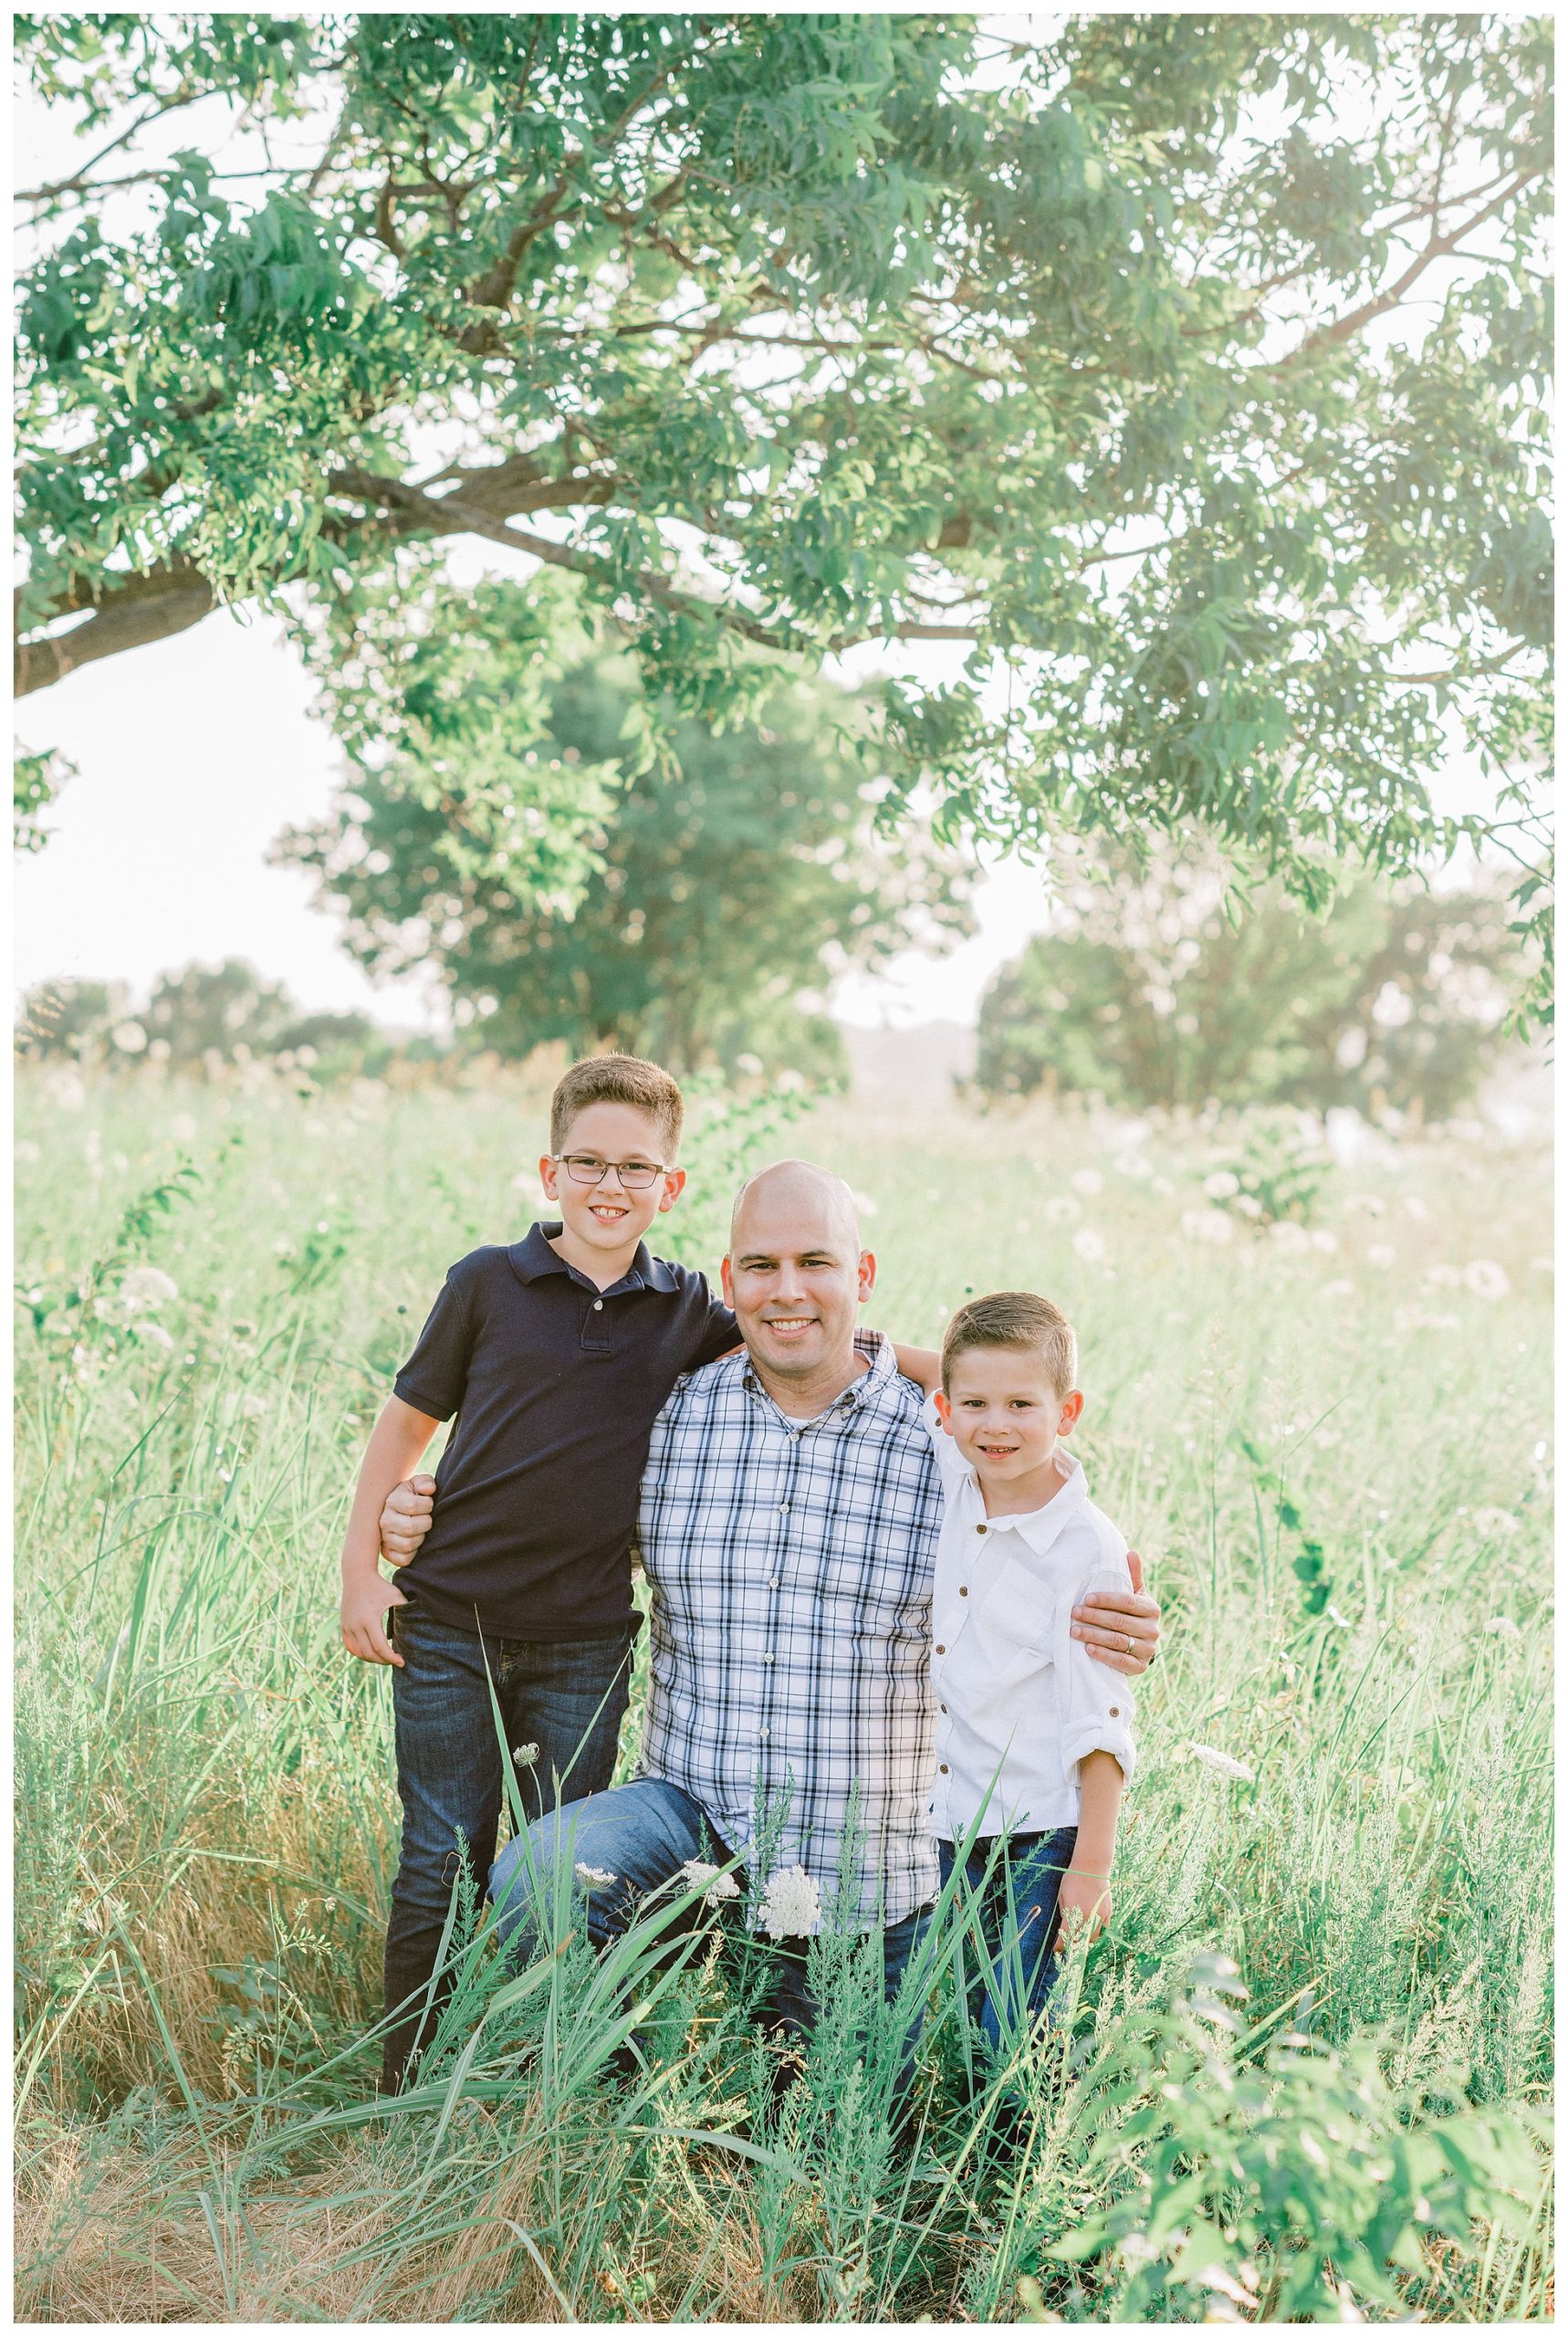 Tips for your family session